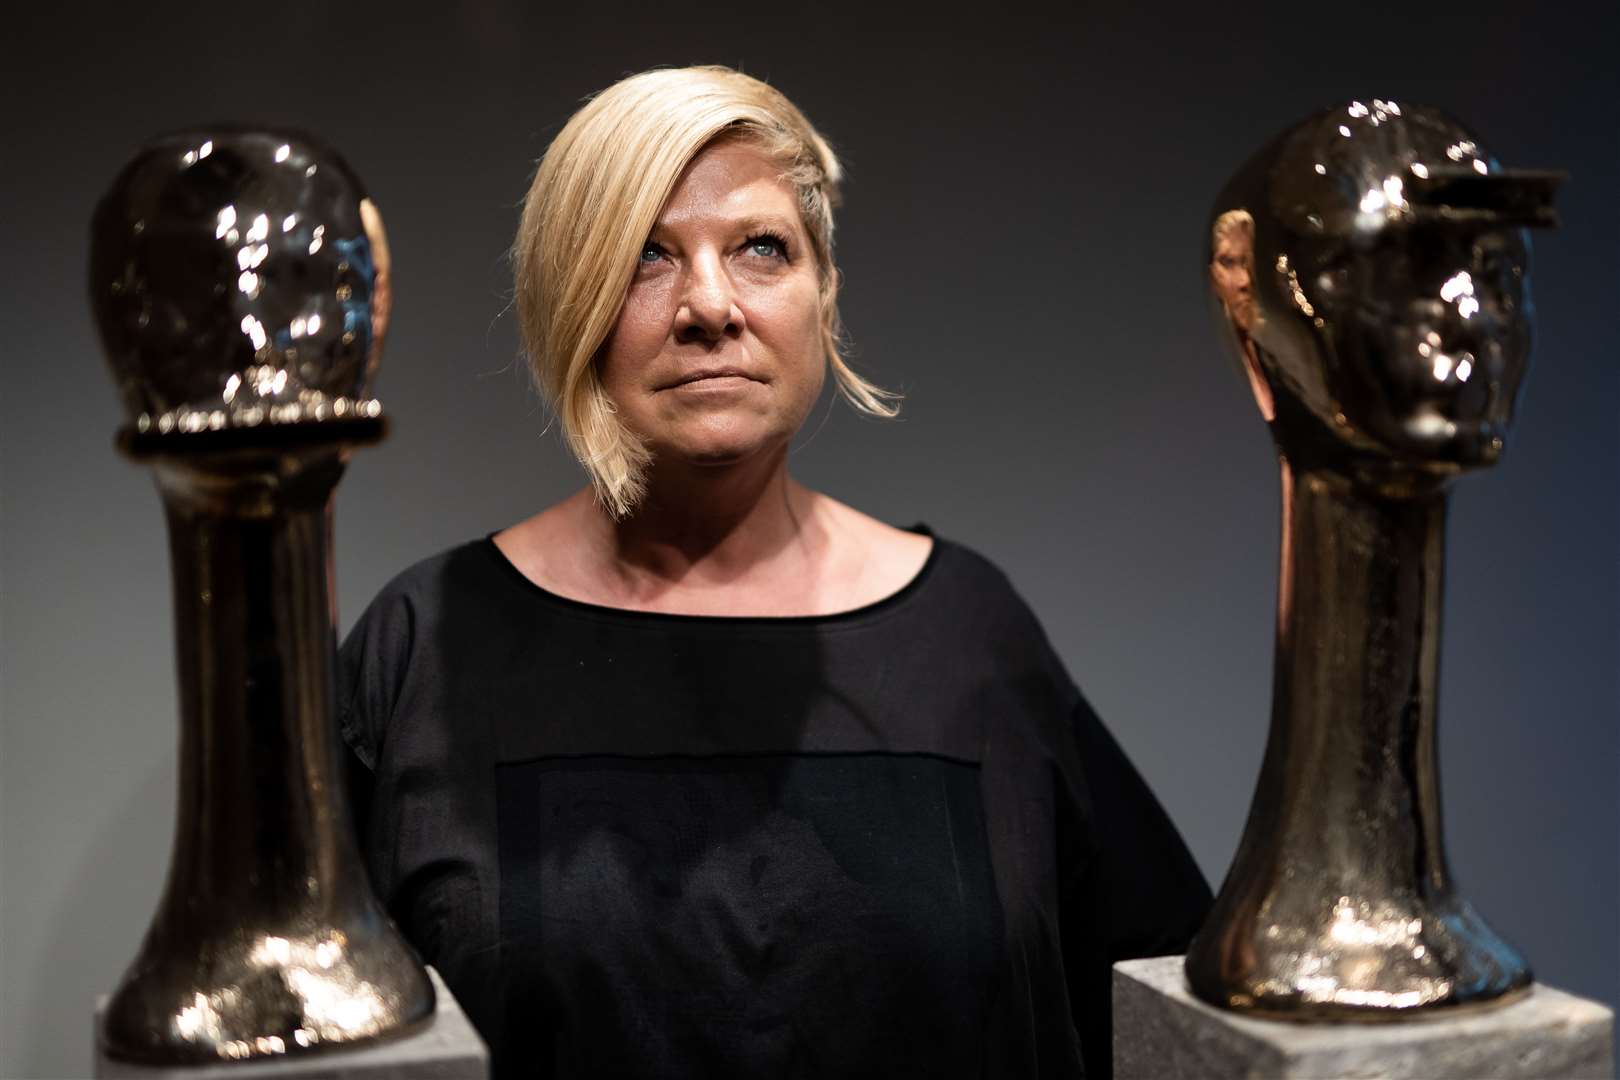 Kerridge praised his wife, sculptor Beth Cullen Kerridge, for her commitment to her art and having ‘never given up on her dream’ (Aaron Chown/PA)